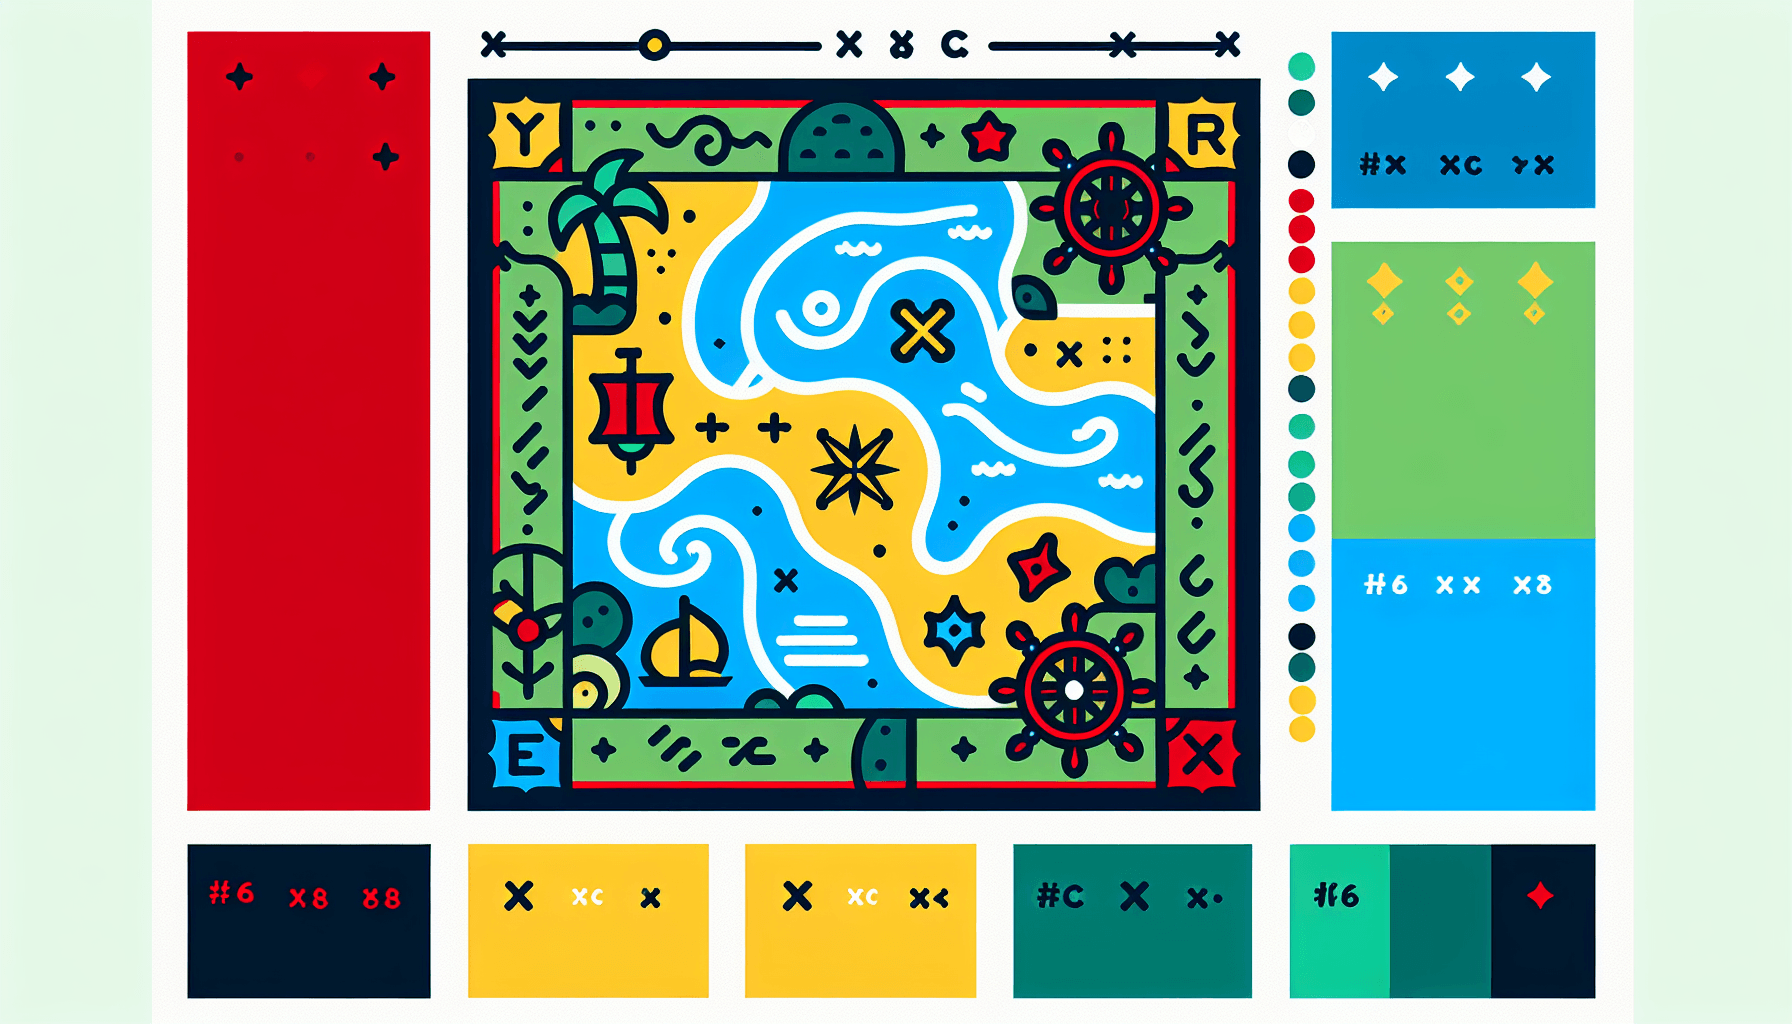 Treasure map in flat illustration style and white background, red #f47574, green #88c7a8, yellow #fcc44b, and blue #645bc8 colors.